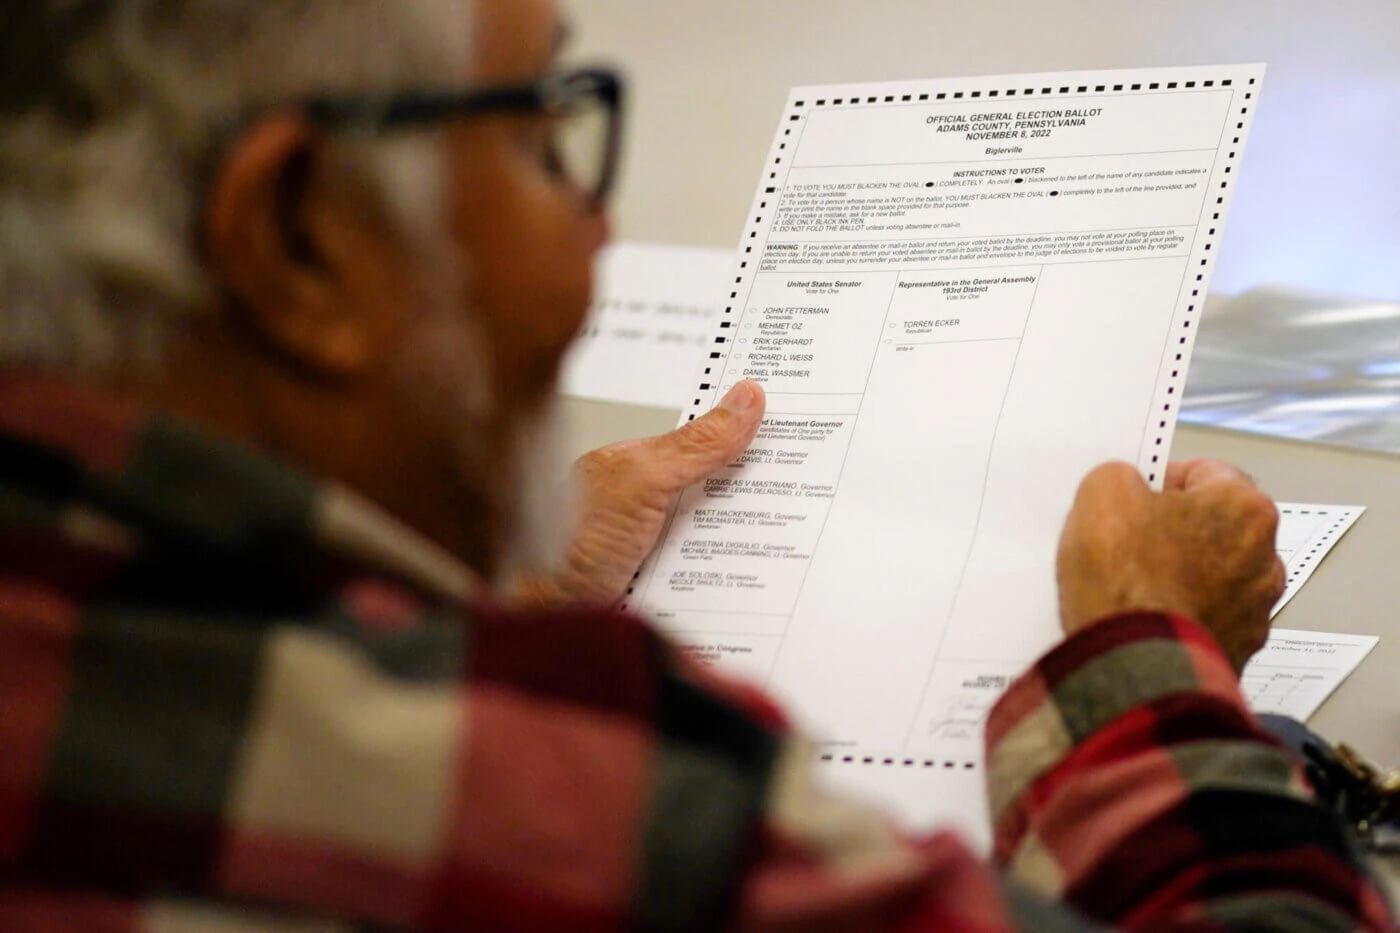 A poll worker holds a ballot at the Trinity Christian Fellowship Hall polling place in Biglerville, Pa., Tuesday, Nov. 8, 2022. (AP Photo/Carolyn Kaster)